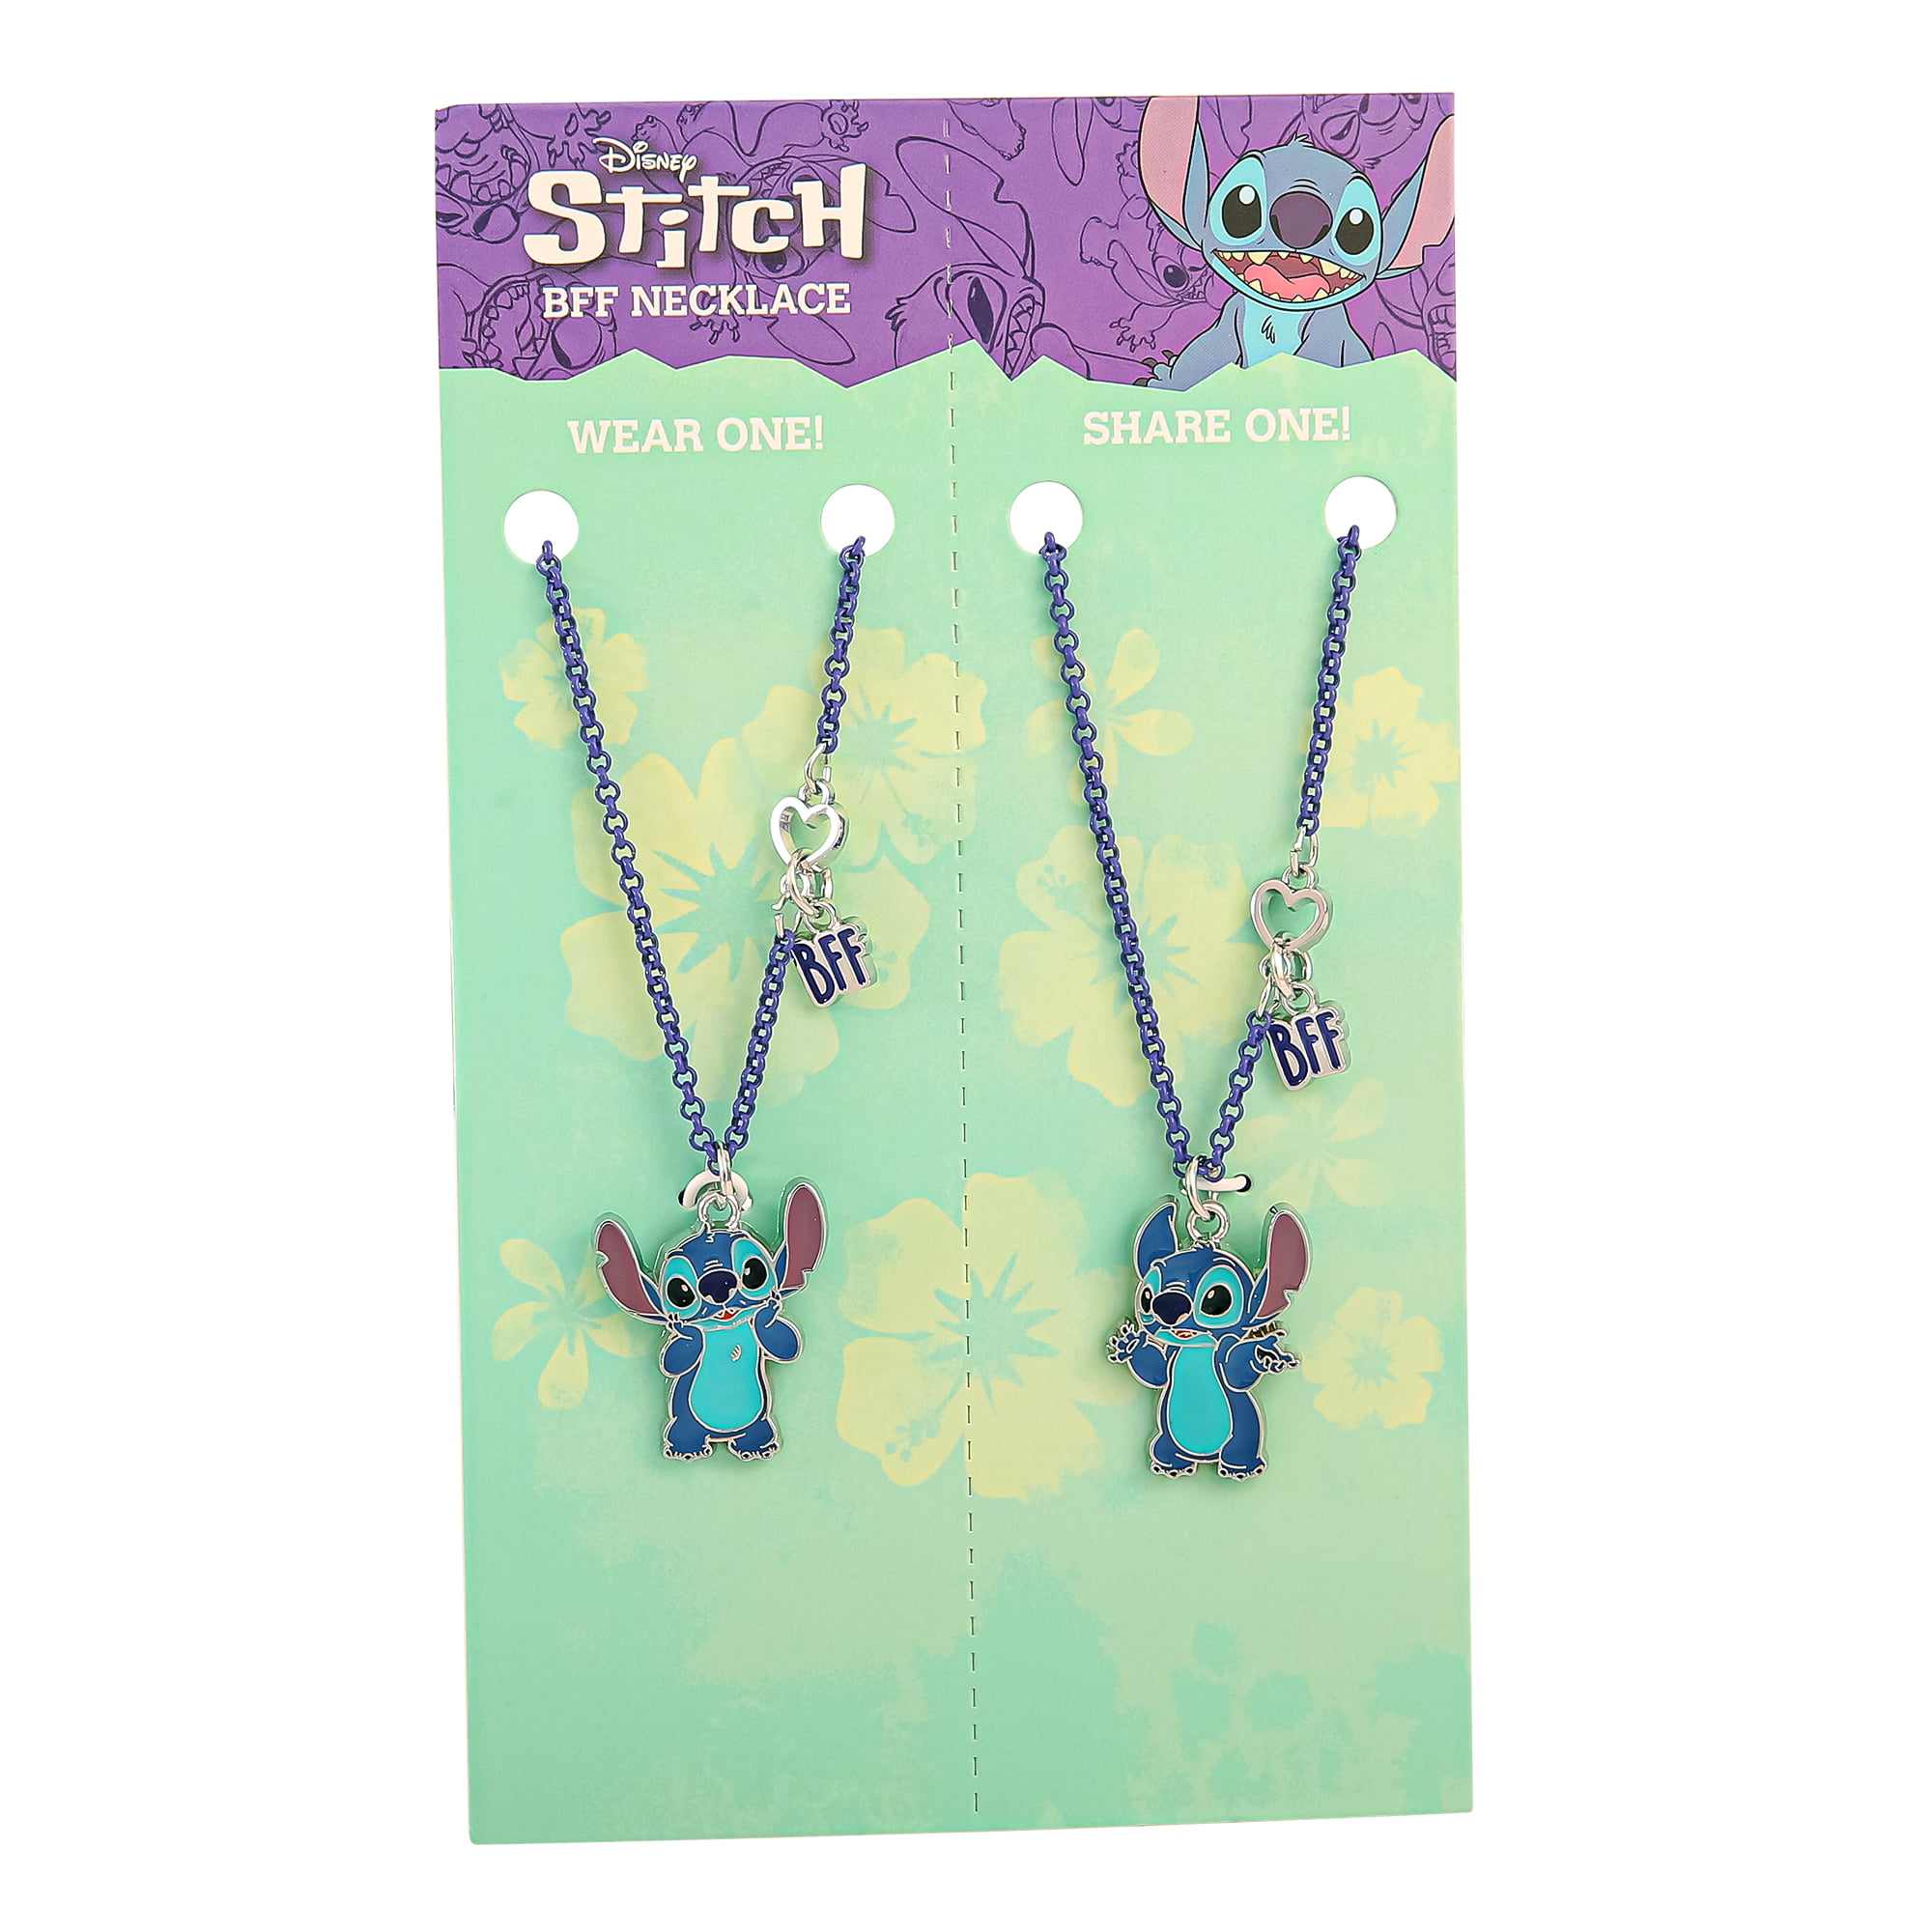 Disney Lilo & Stitch Girls BFF Necklace Set of 2 - Best Friends Necklaces  with BFF and Stitch Charm - Stitch Jewelry - Best Friends Necklaces,  Costume, No Gemstone : Amazon.ca: Clothing, Shoes & Accessories